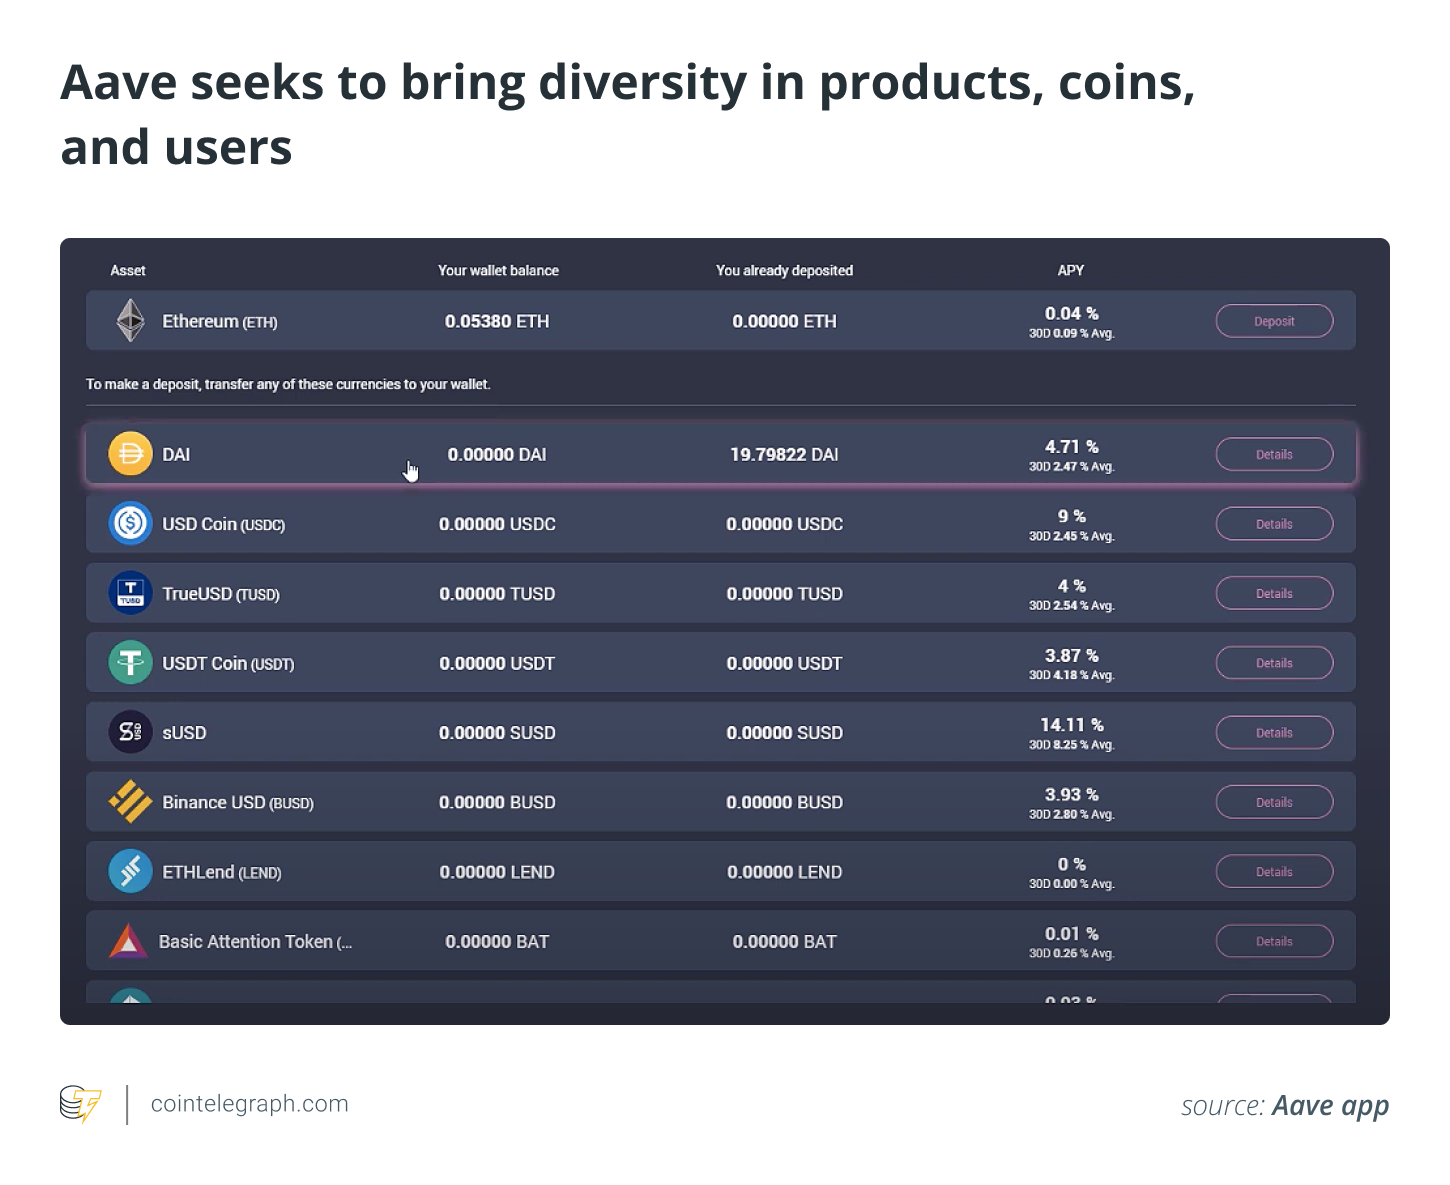 Aave seeks to bring diversity in products, coins, and users